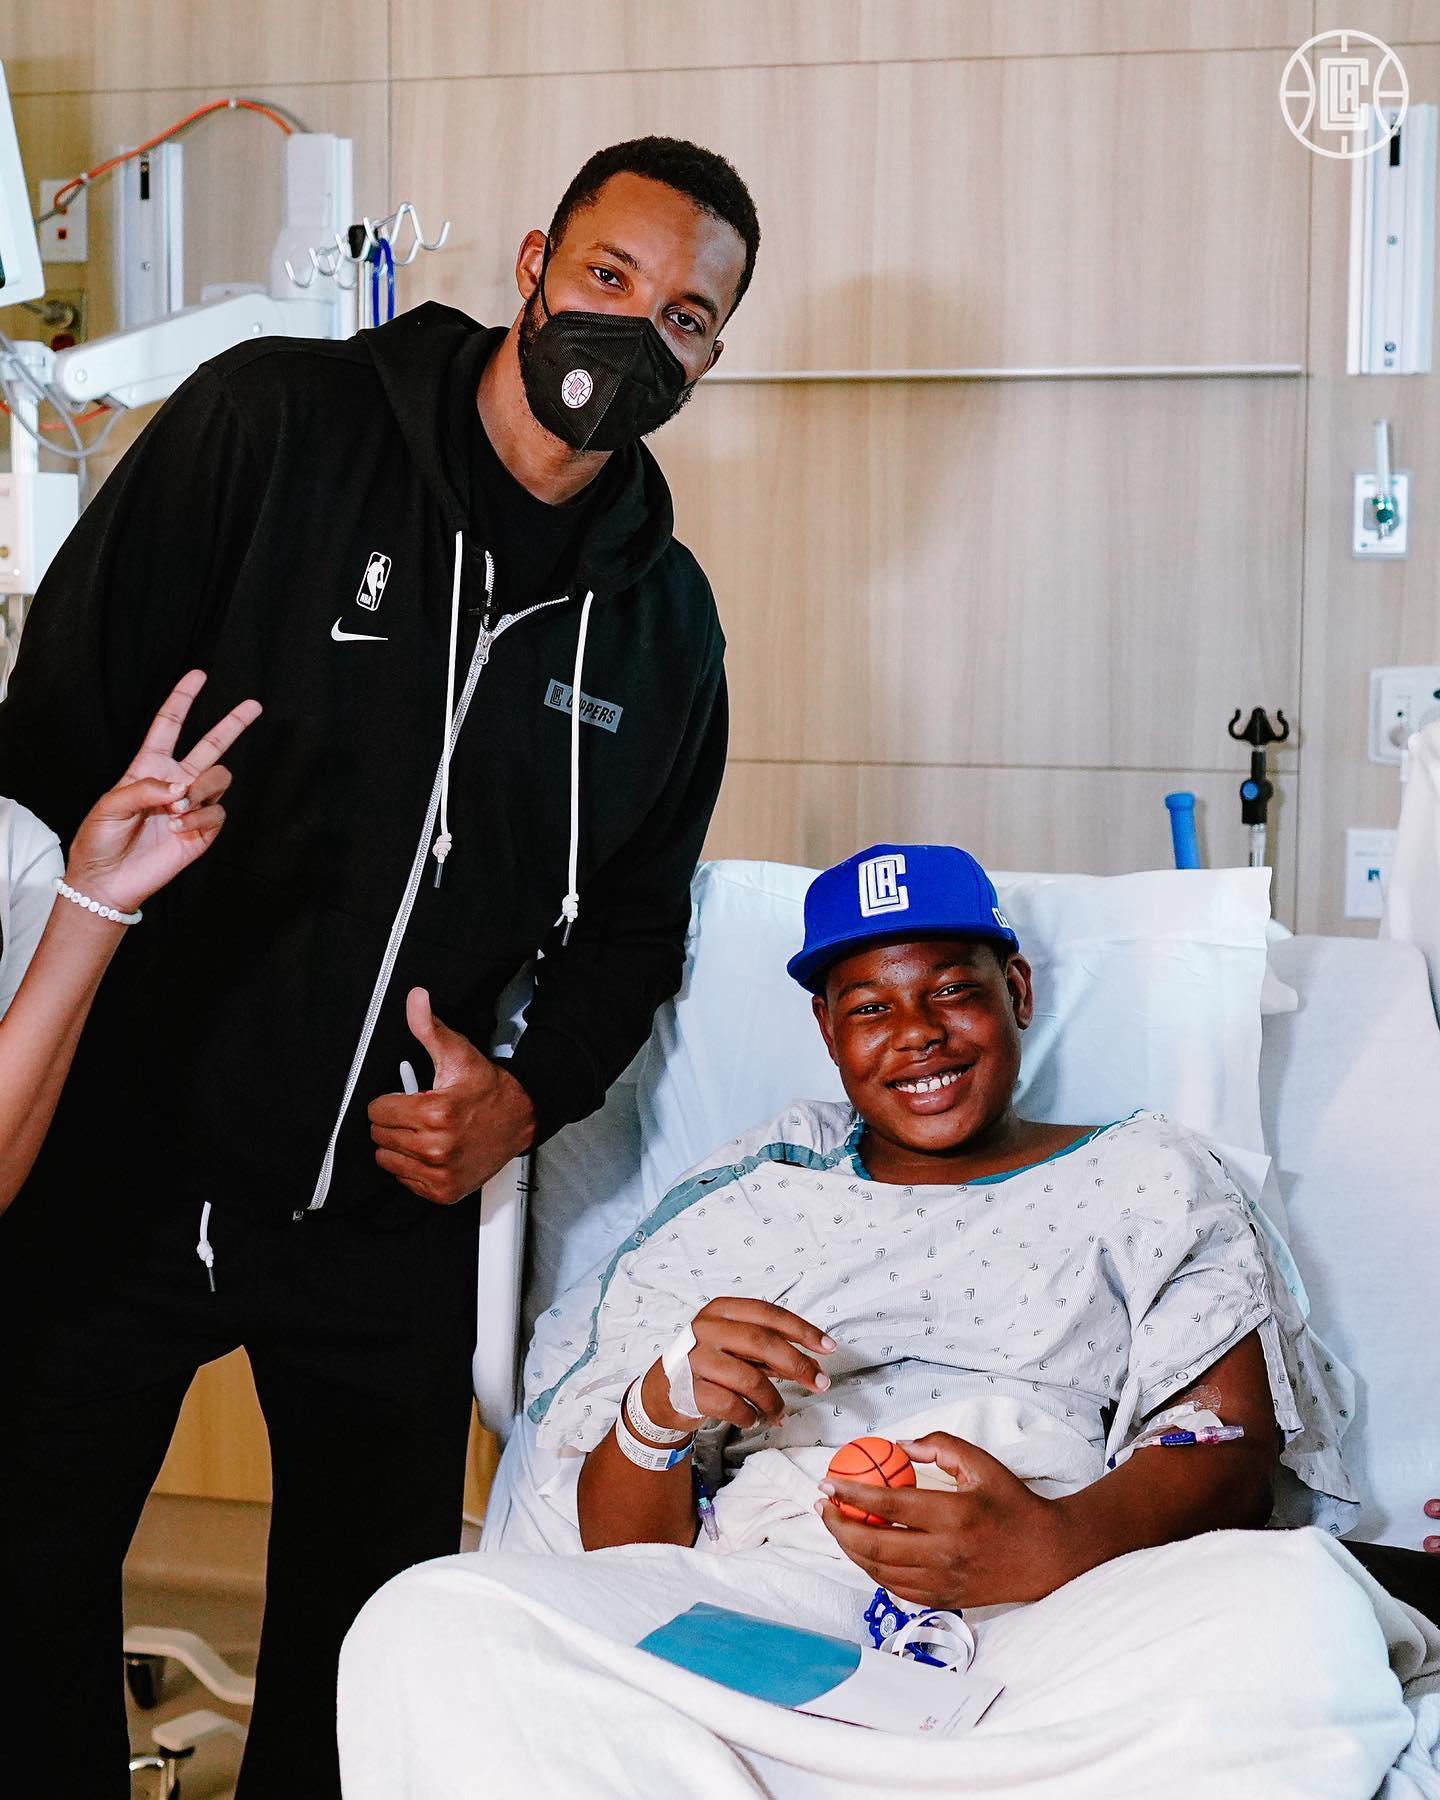 LA Clippers - #normanpowell4 spent Monday visiting some amazing fans at #cedarssinai